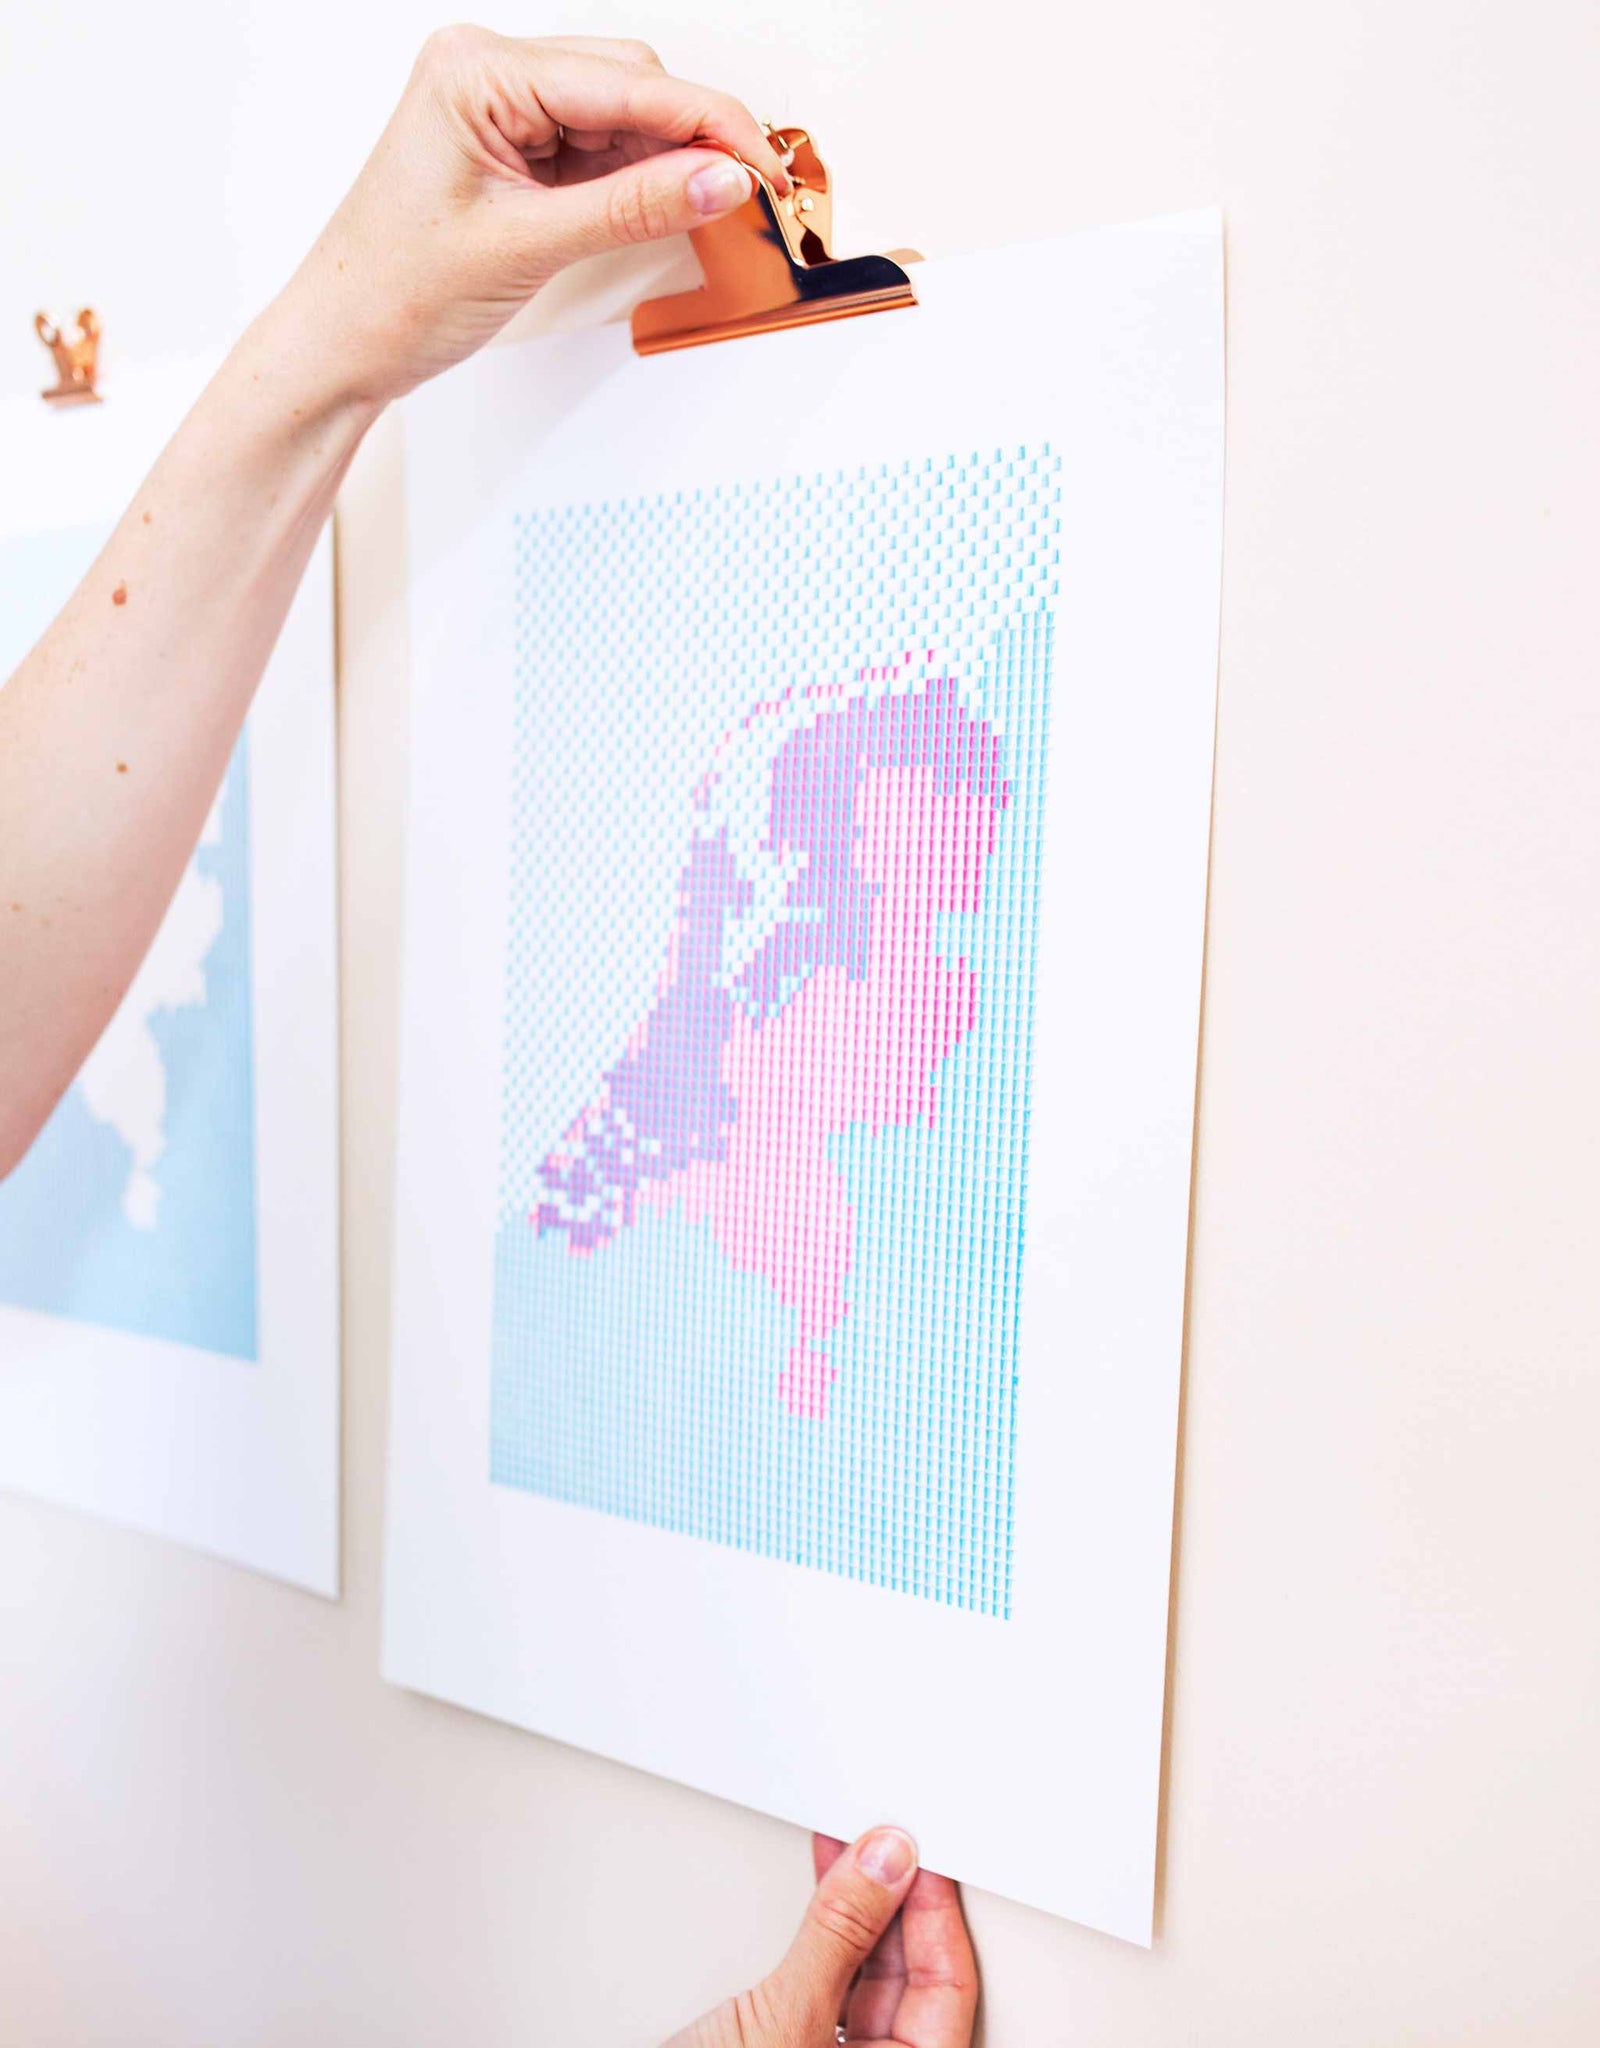 Hand clipping Letterpress patterned map of The Netherlands to wall. Magenta and blue patterned kaba ornaments.